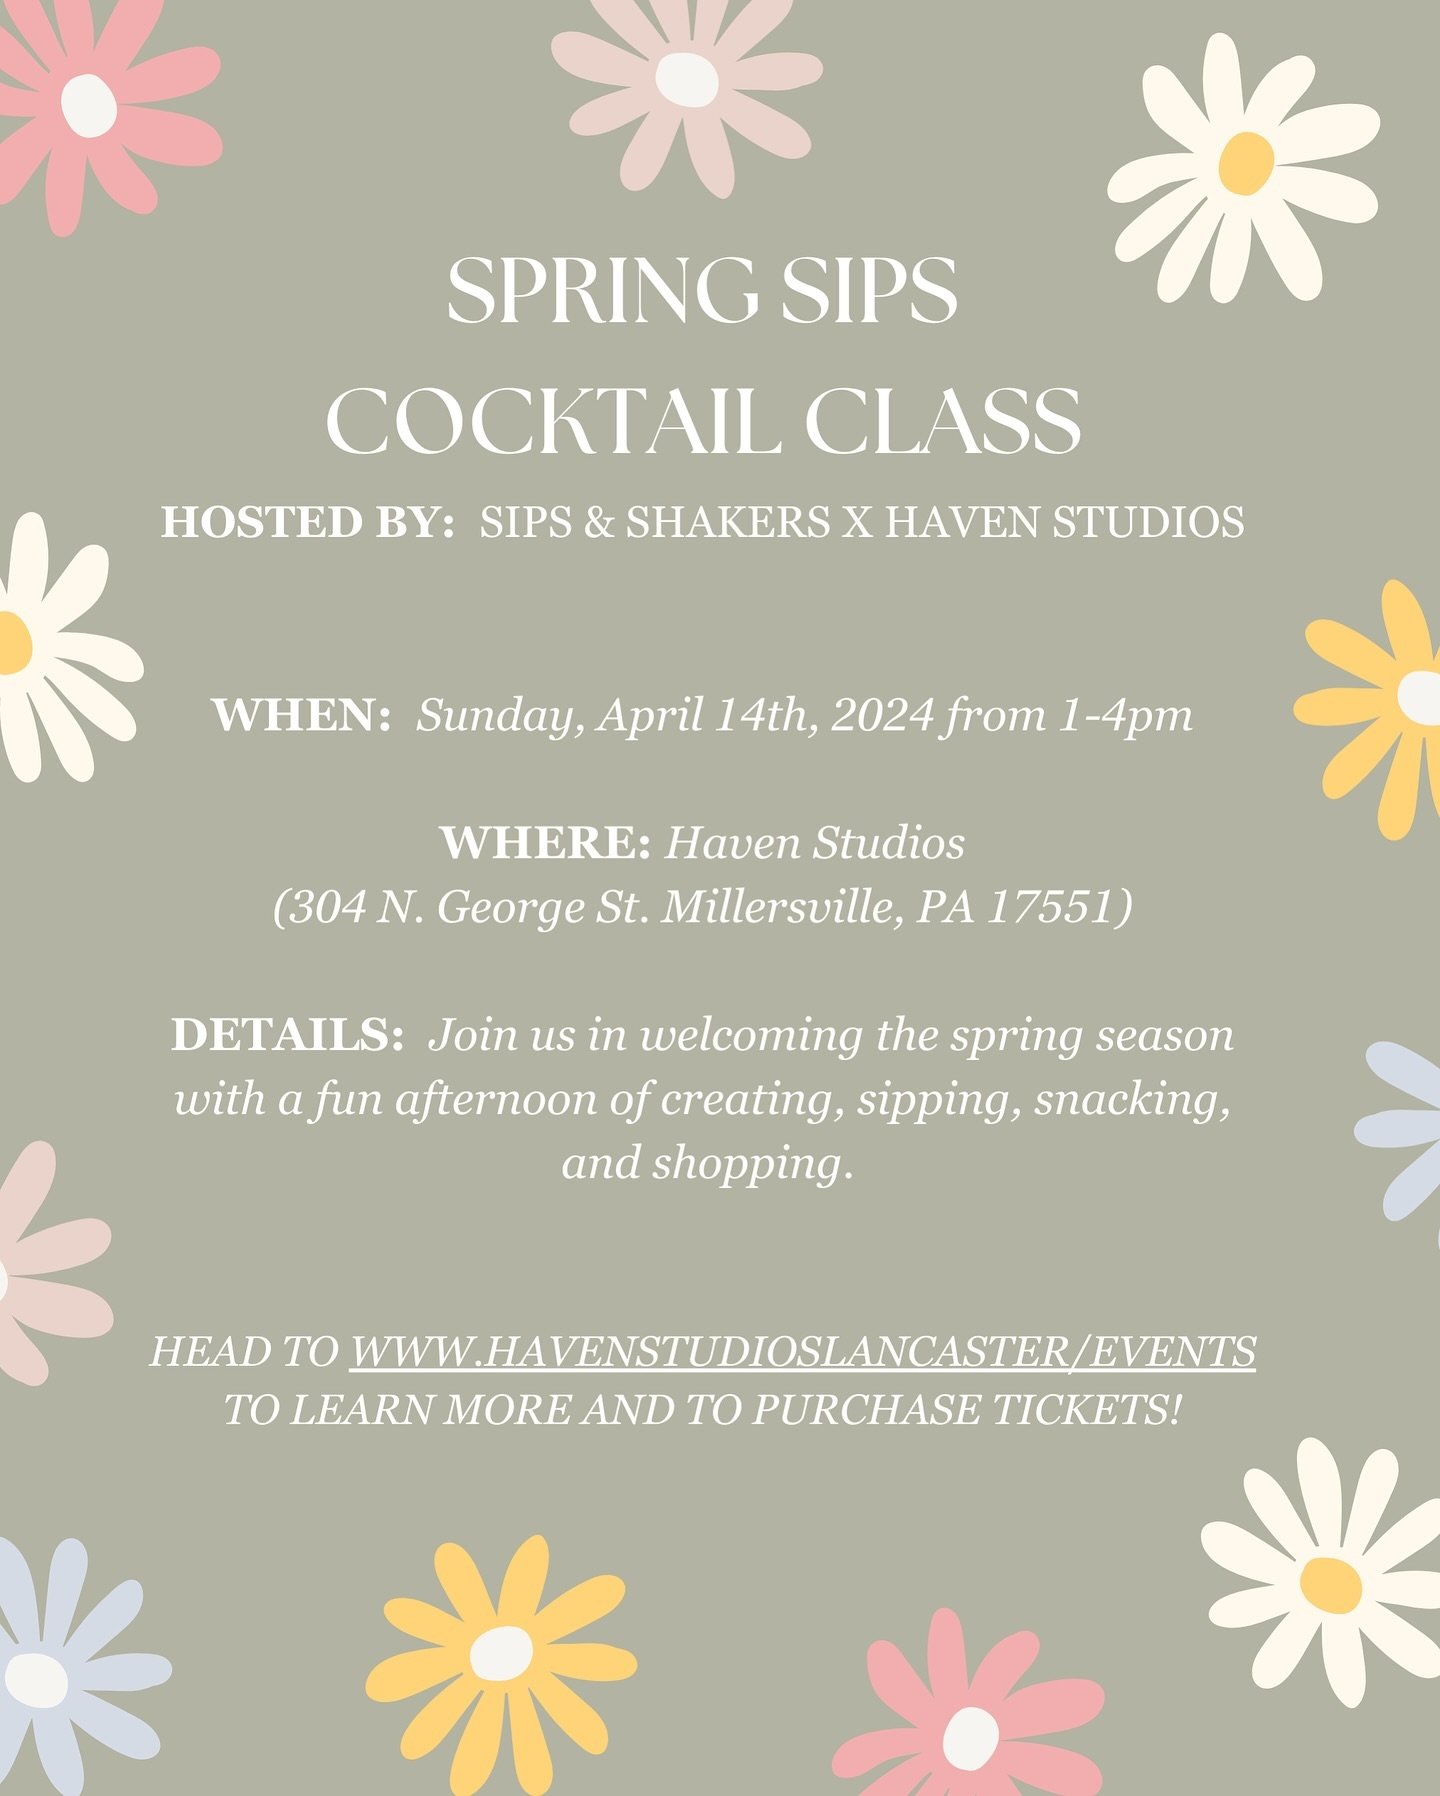 Join Haven, @sipsandshakersbartending and several other locally owned businesses by welcoming the spring season with a fun afternoon of creating, sipping, snacking, and shopping on Sunday, April 14th from 1-4pm at the studio🌸

Kelly, from Sips and S